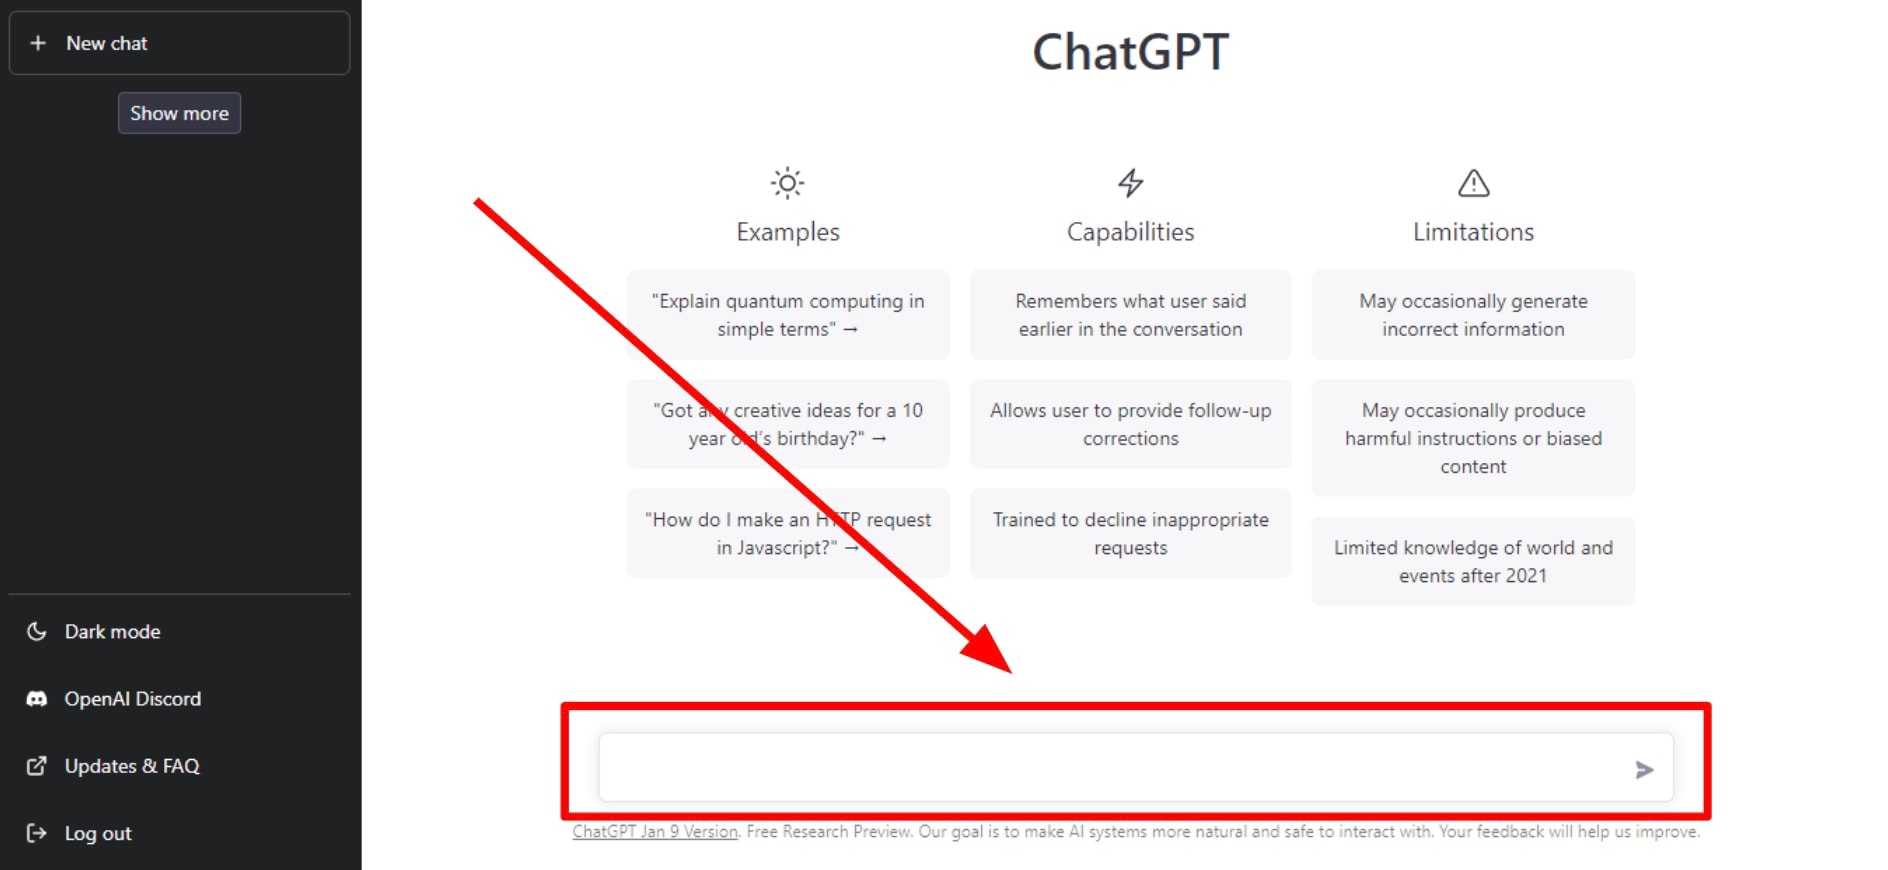 ChatGPT Email Marketing Prompts